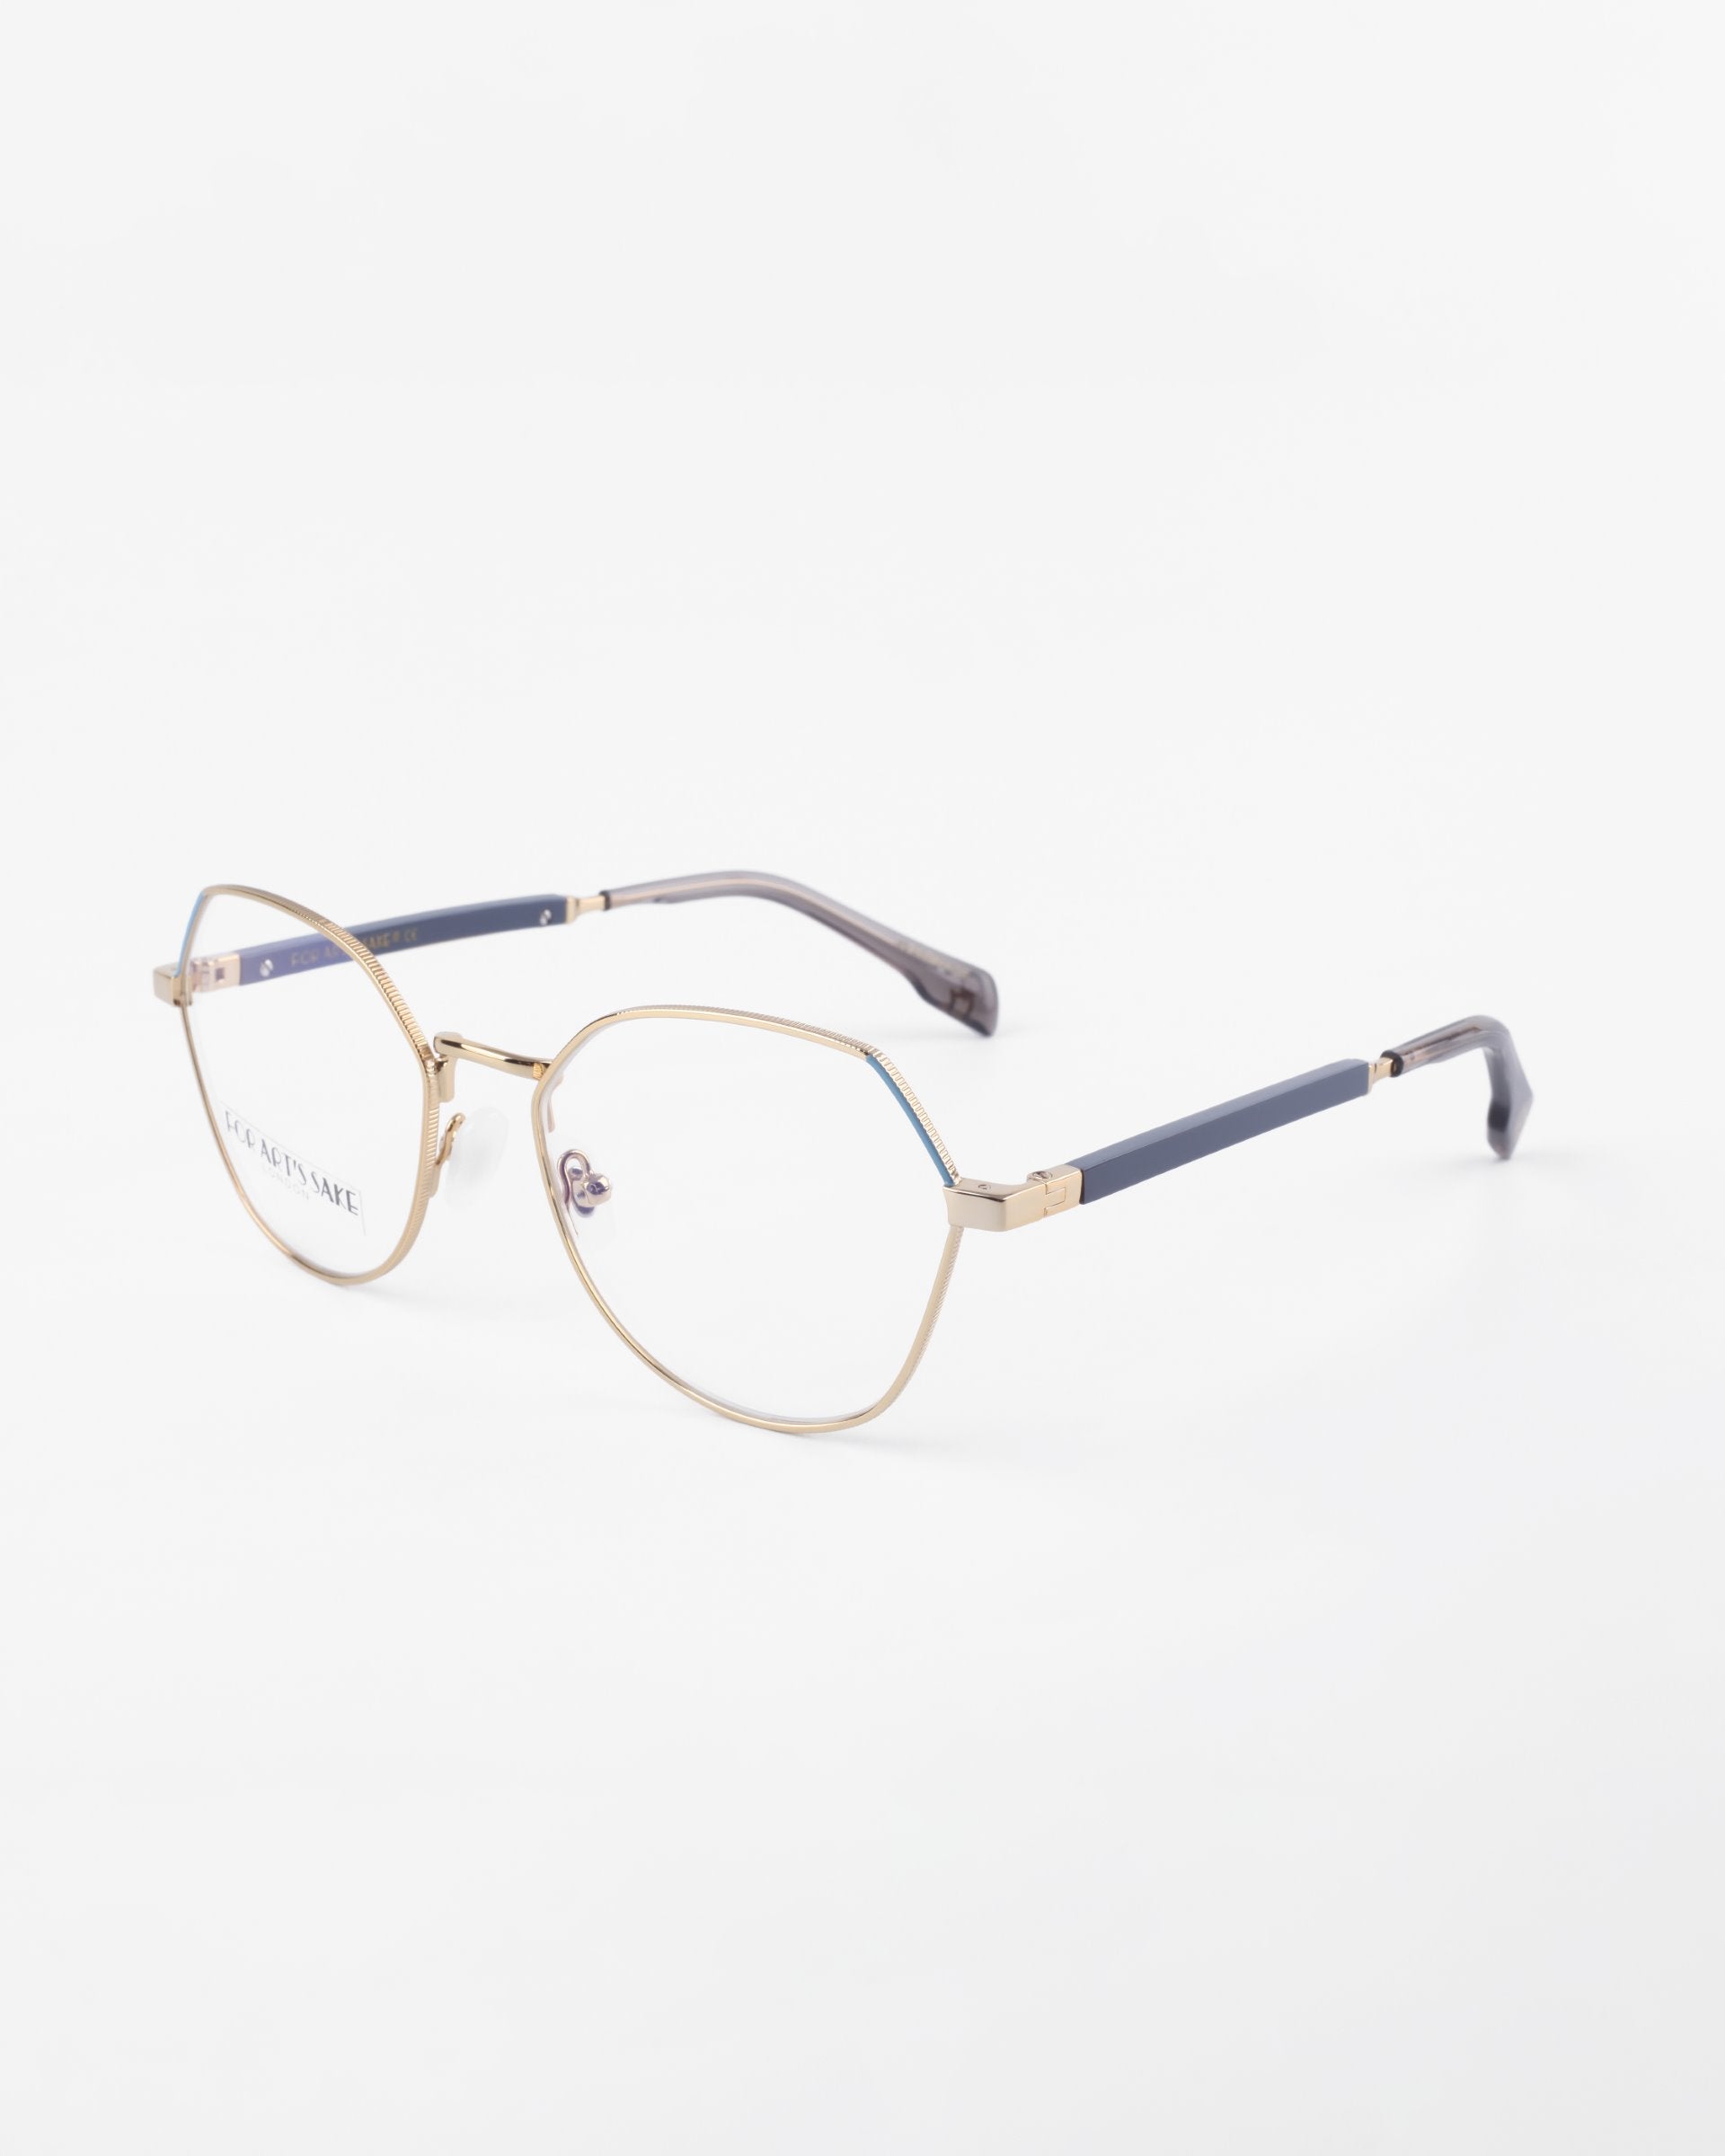 Close-up of a pair of Orchard frames by For Art&#39;s Sake® with clear prescription lenses, featuring an angular design and navy-blue accents on the tips of the arms. The glasses are positioned against a plain white background.